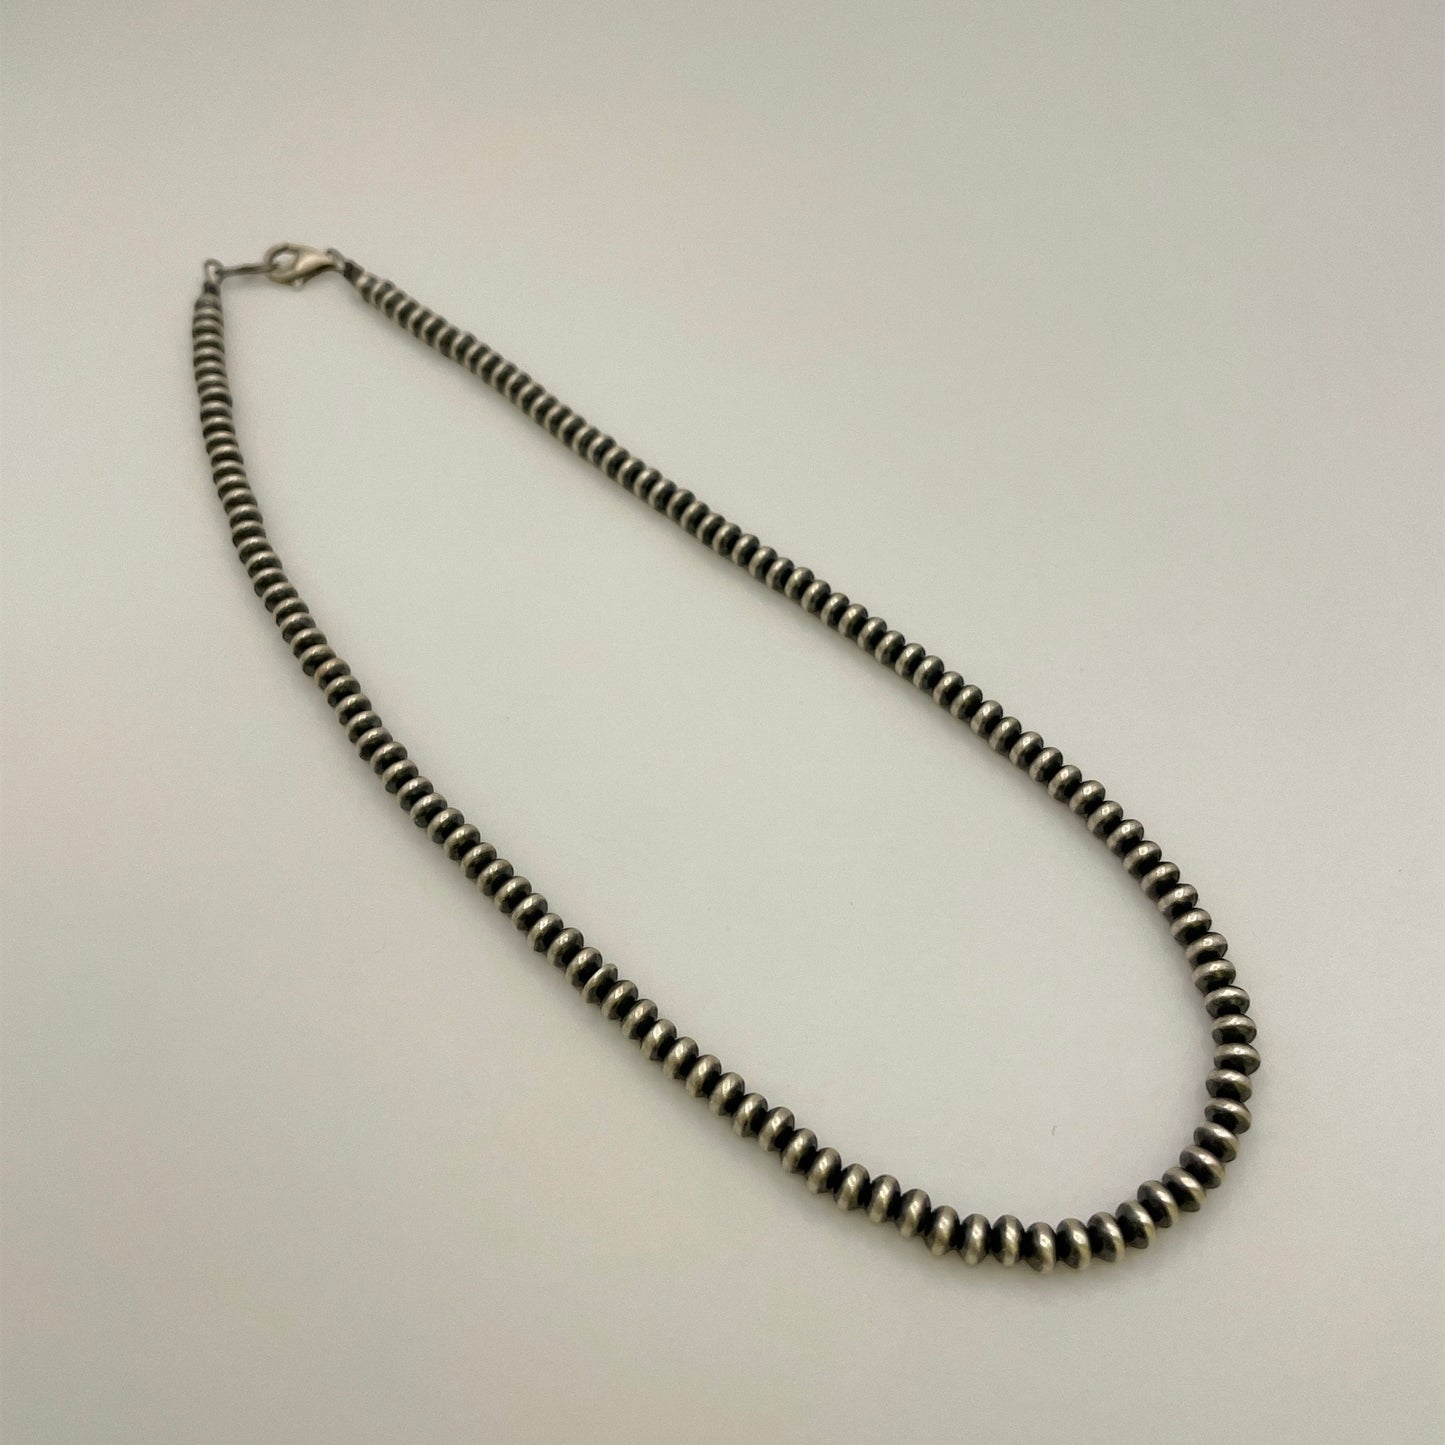 Saucer Navajo Pearls Necklace 4mm - 16"